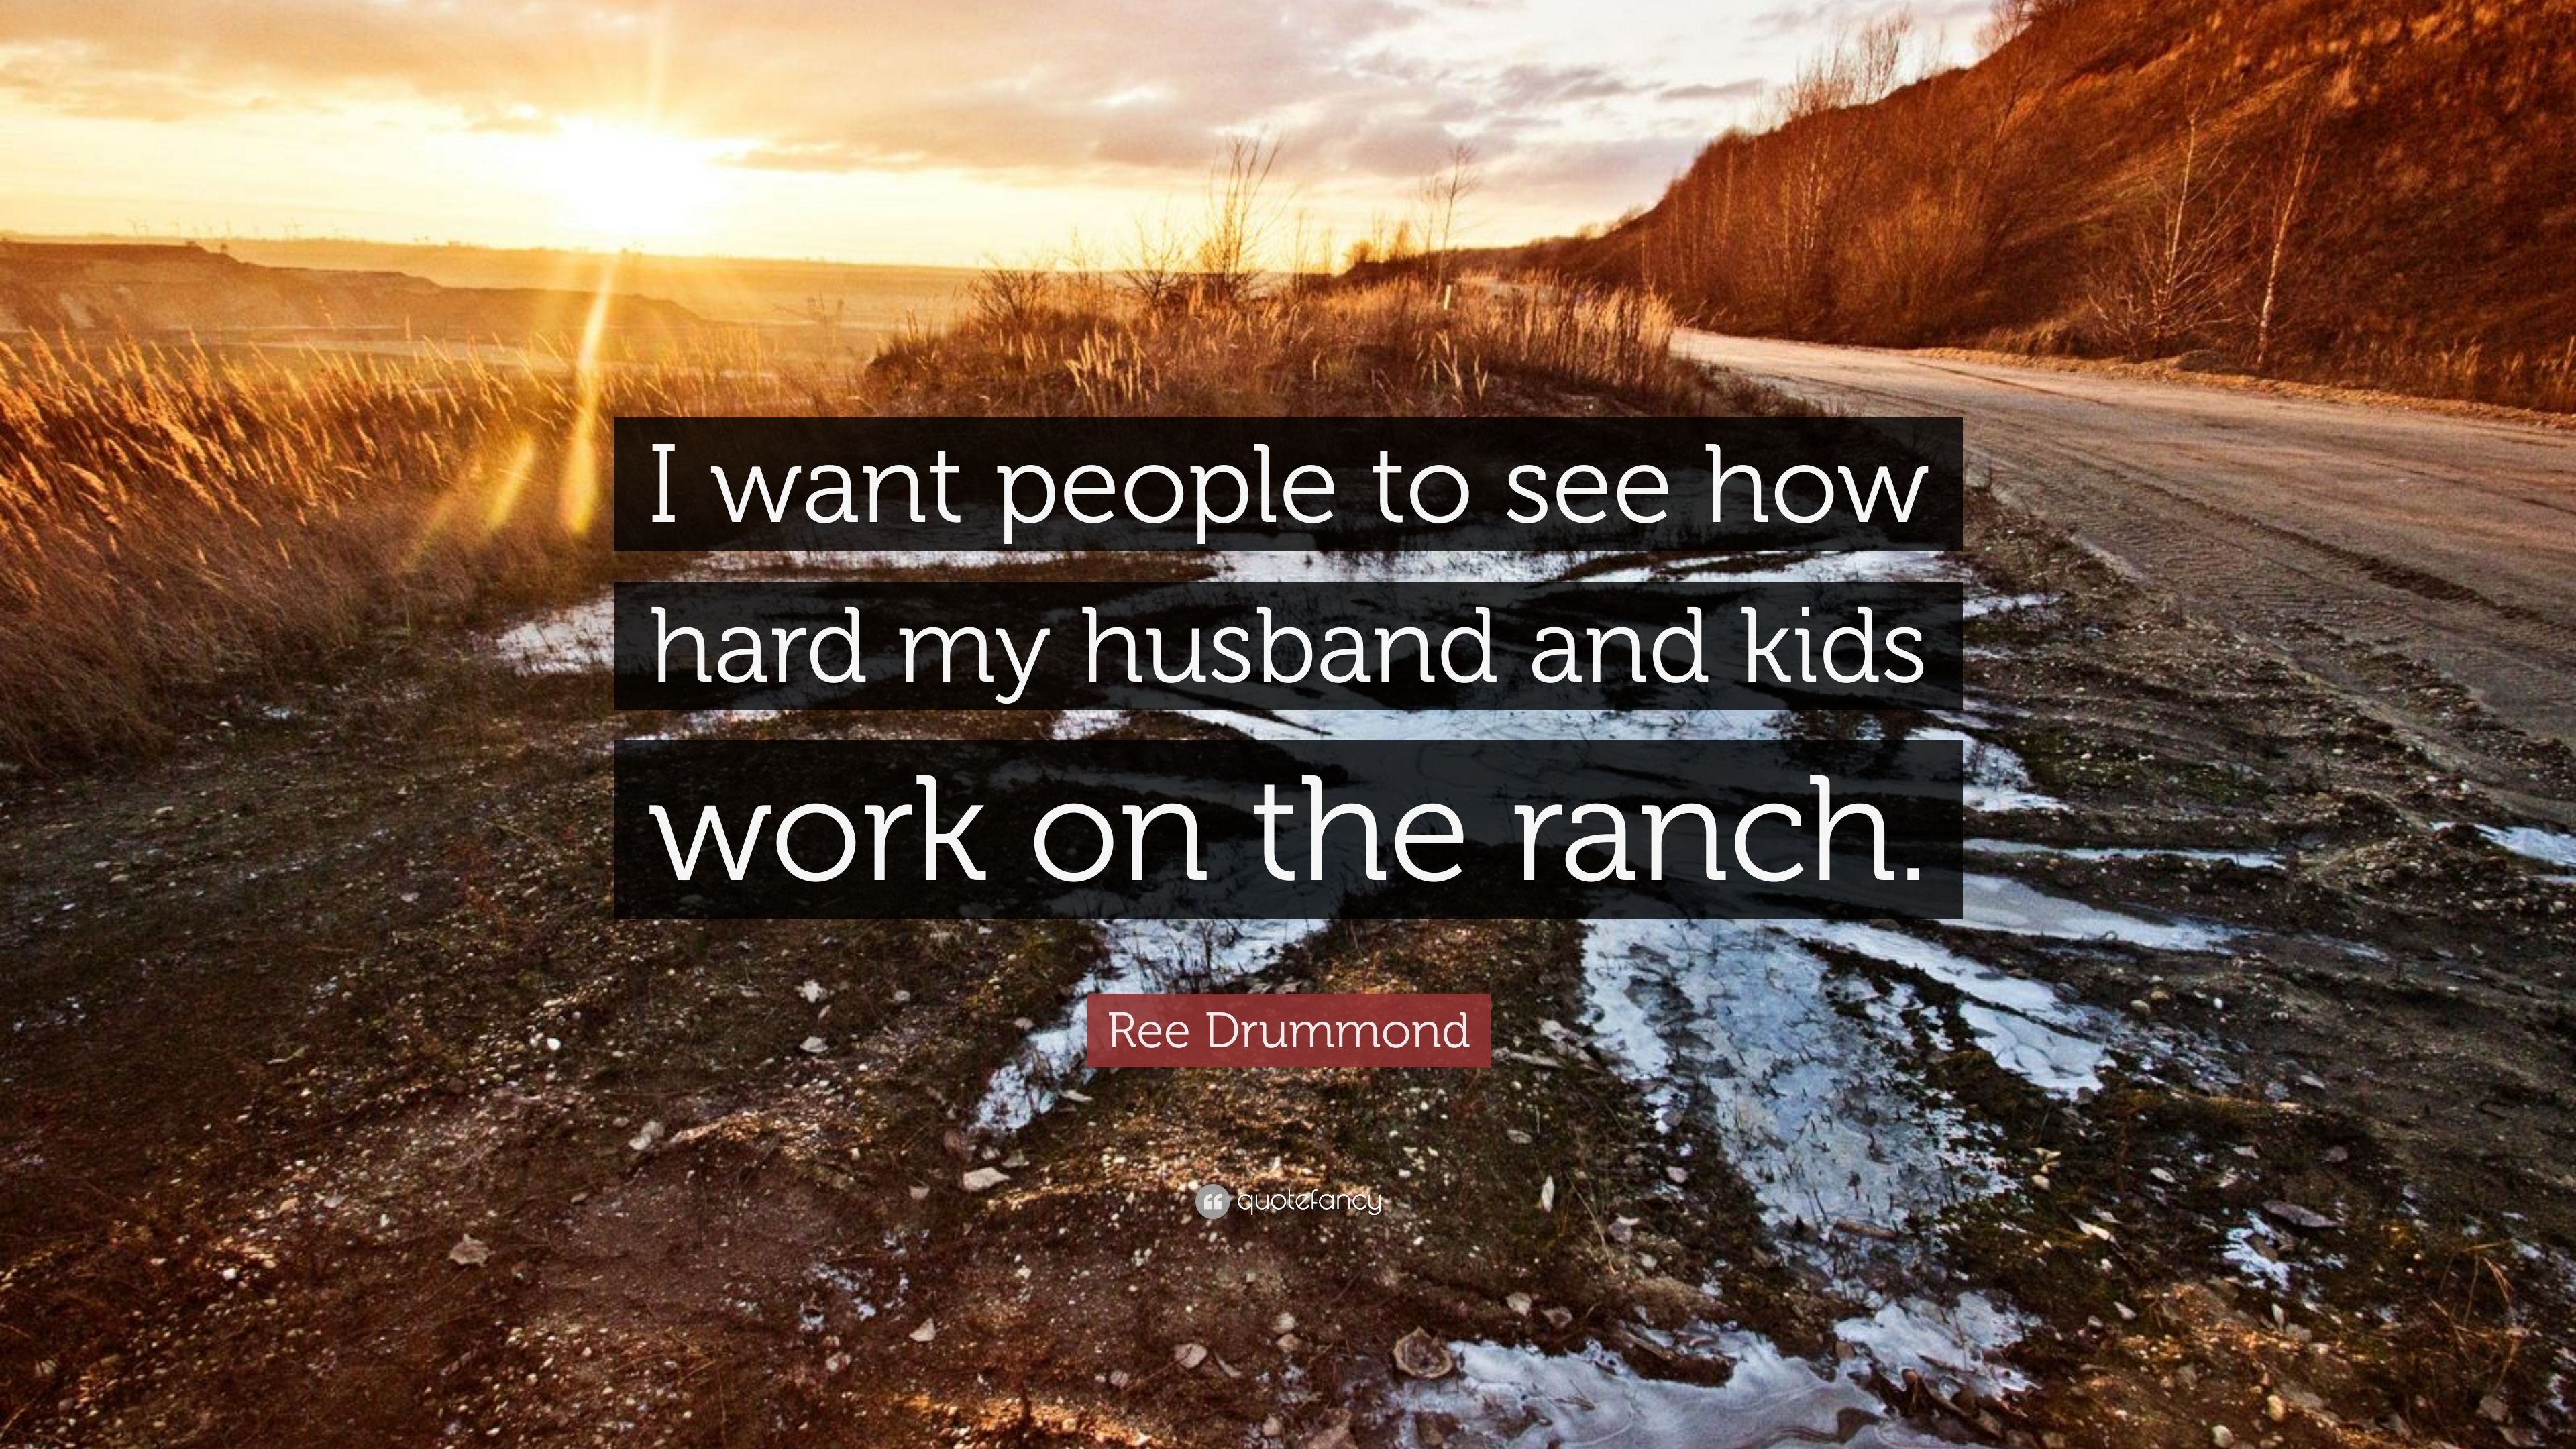 Ree Drummond Quote: “I want people to see how hard my husband